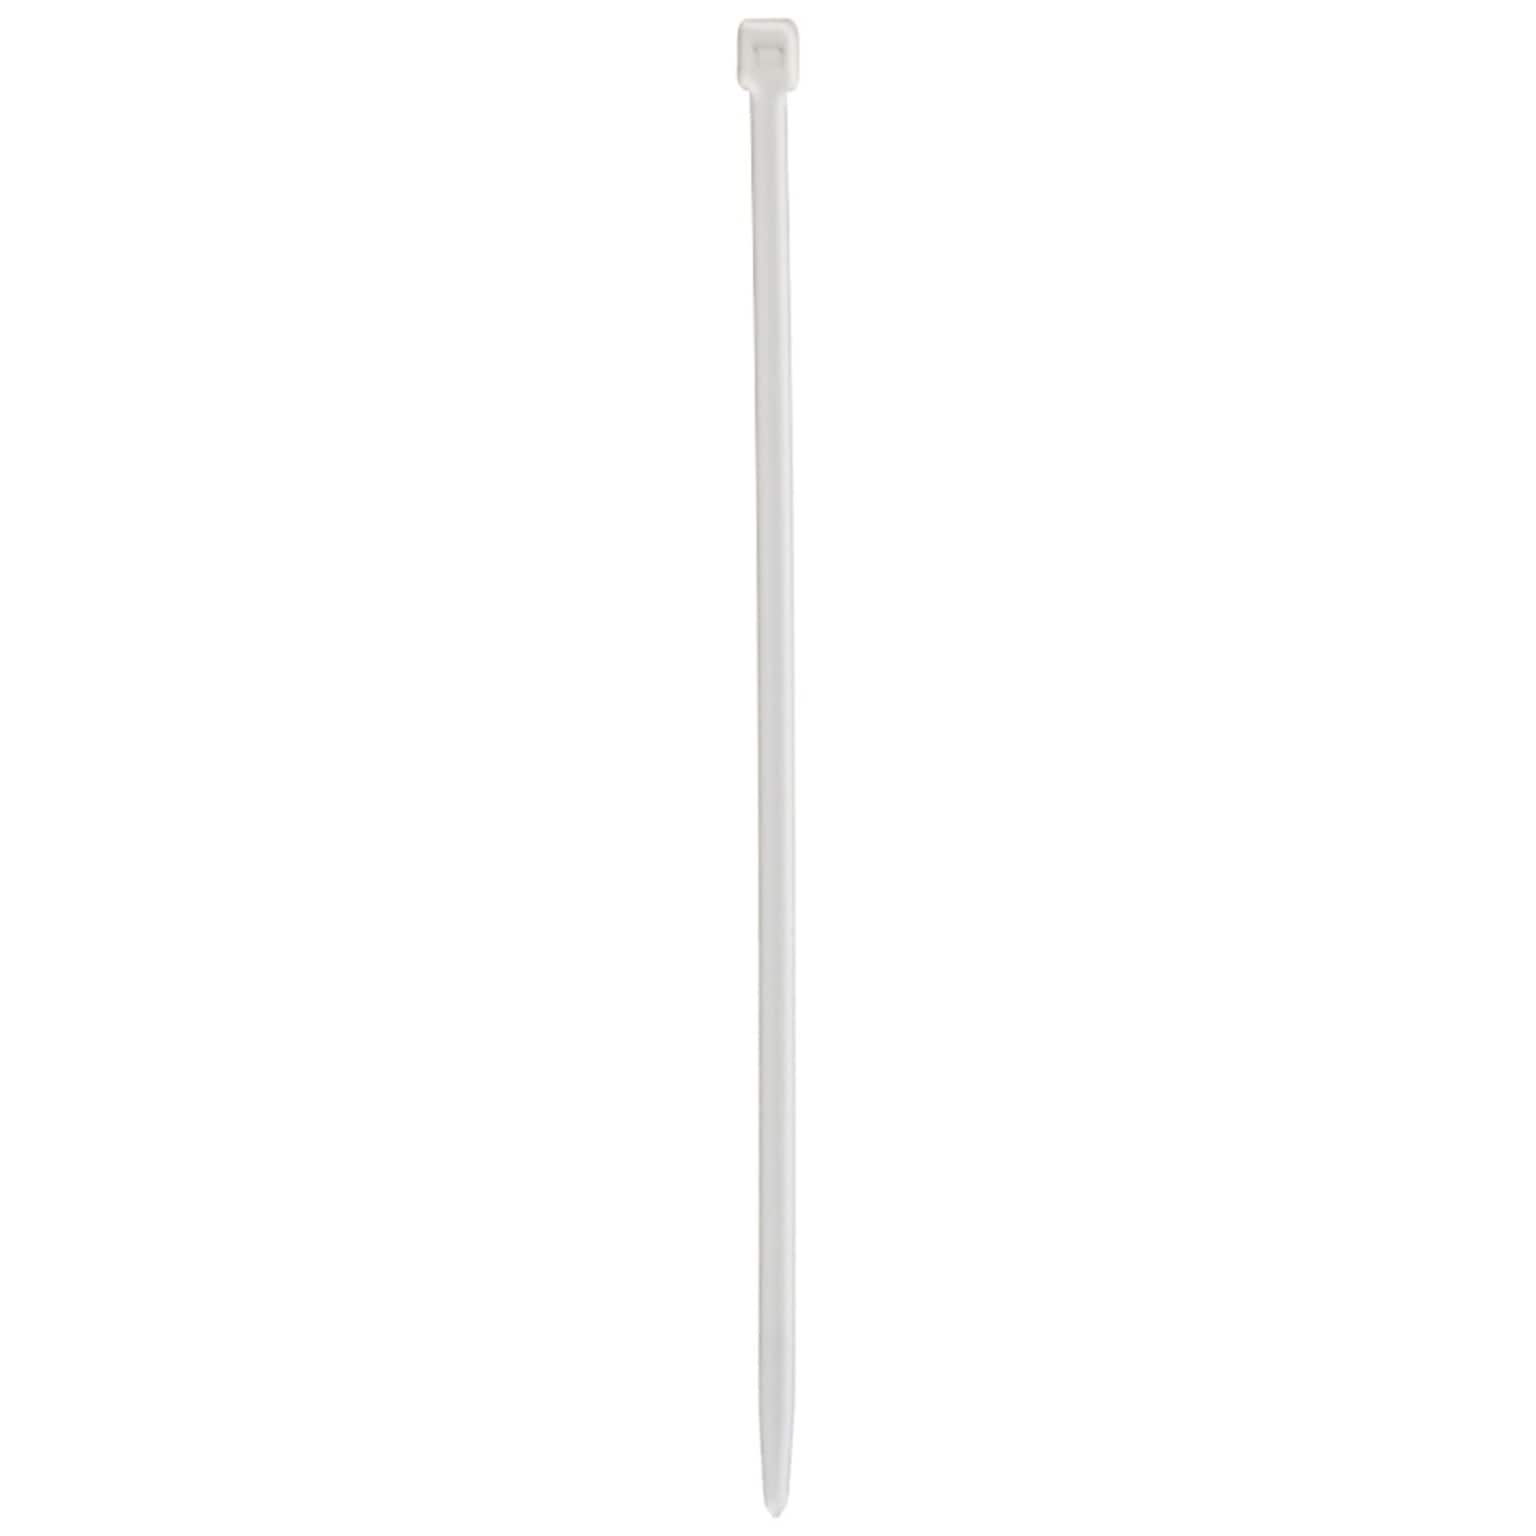 Eagle Aspen 501028 Temperature-rated Cable Ties, 100 Pk (white, 7.5)